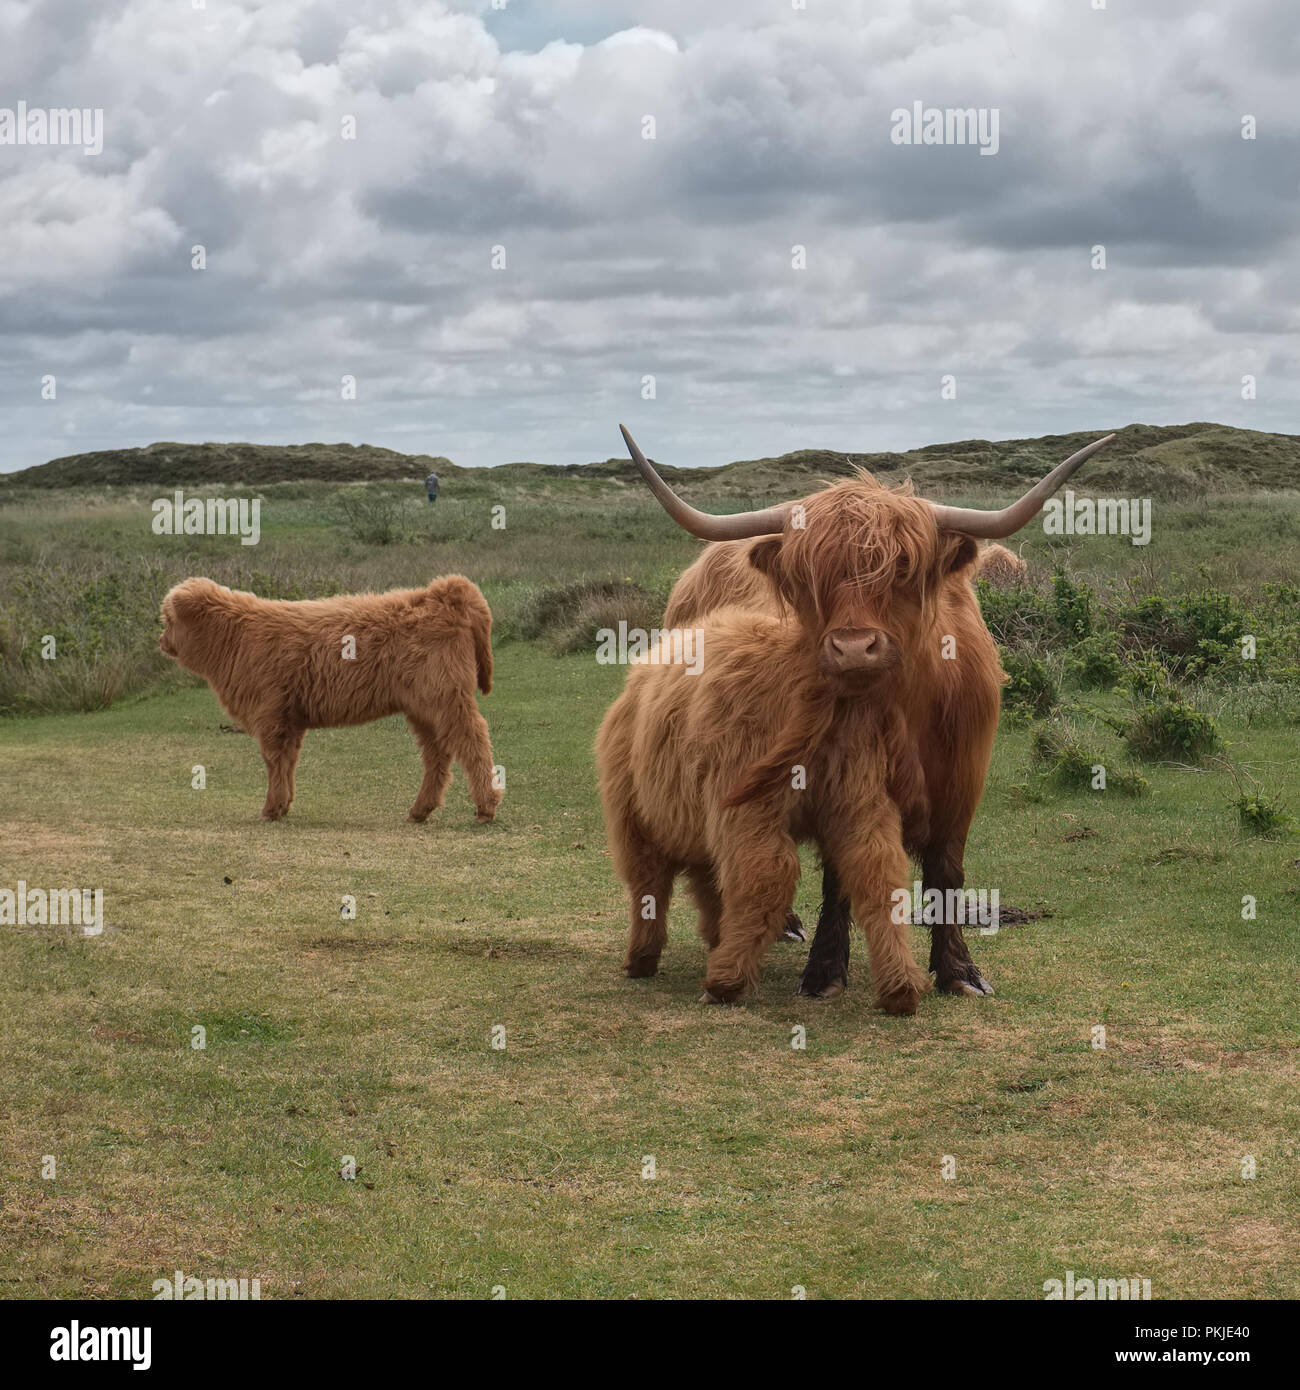 Illustration shows Scottish Highland cow and calf in the Dunes of Texel, Monday 16 May 2016, Texel, the Netherlands. Stock Photo